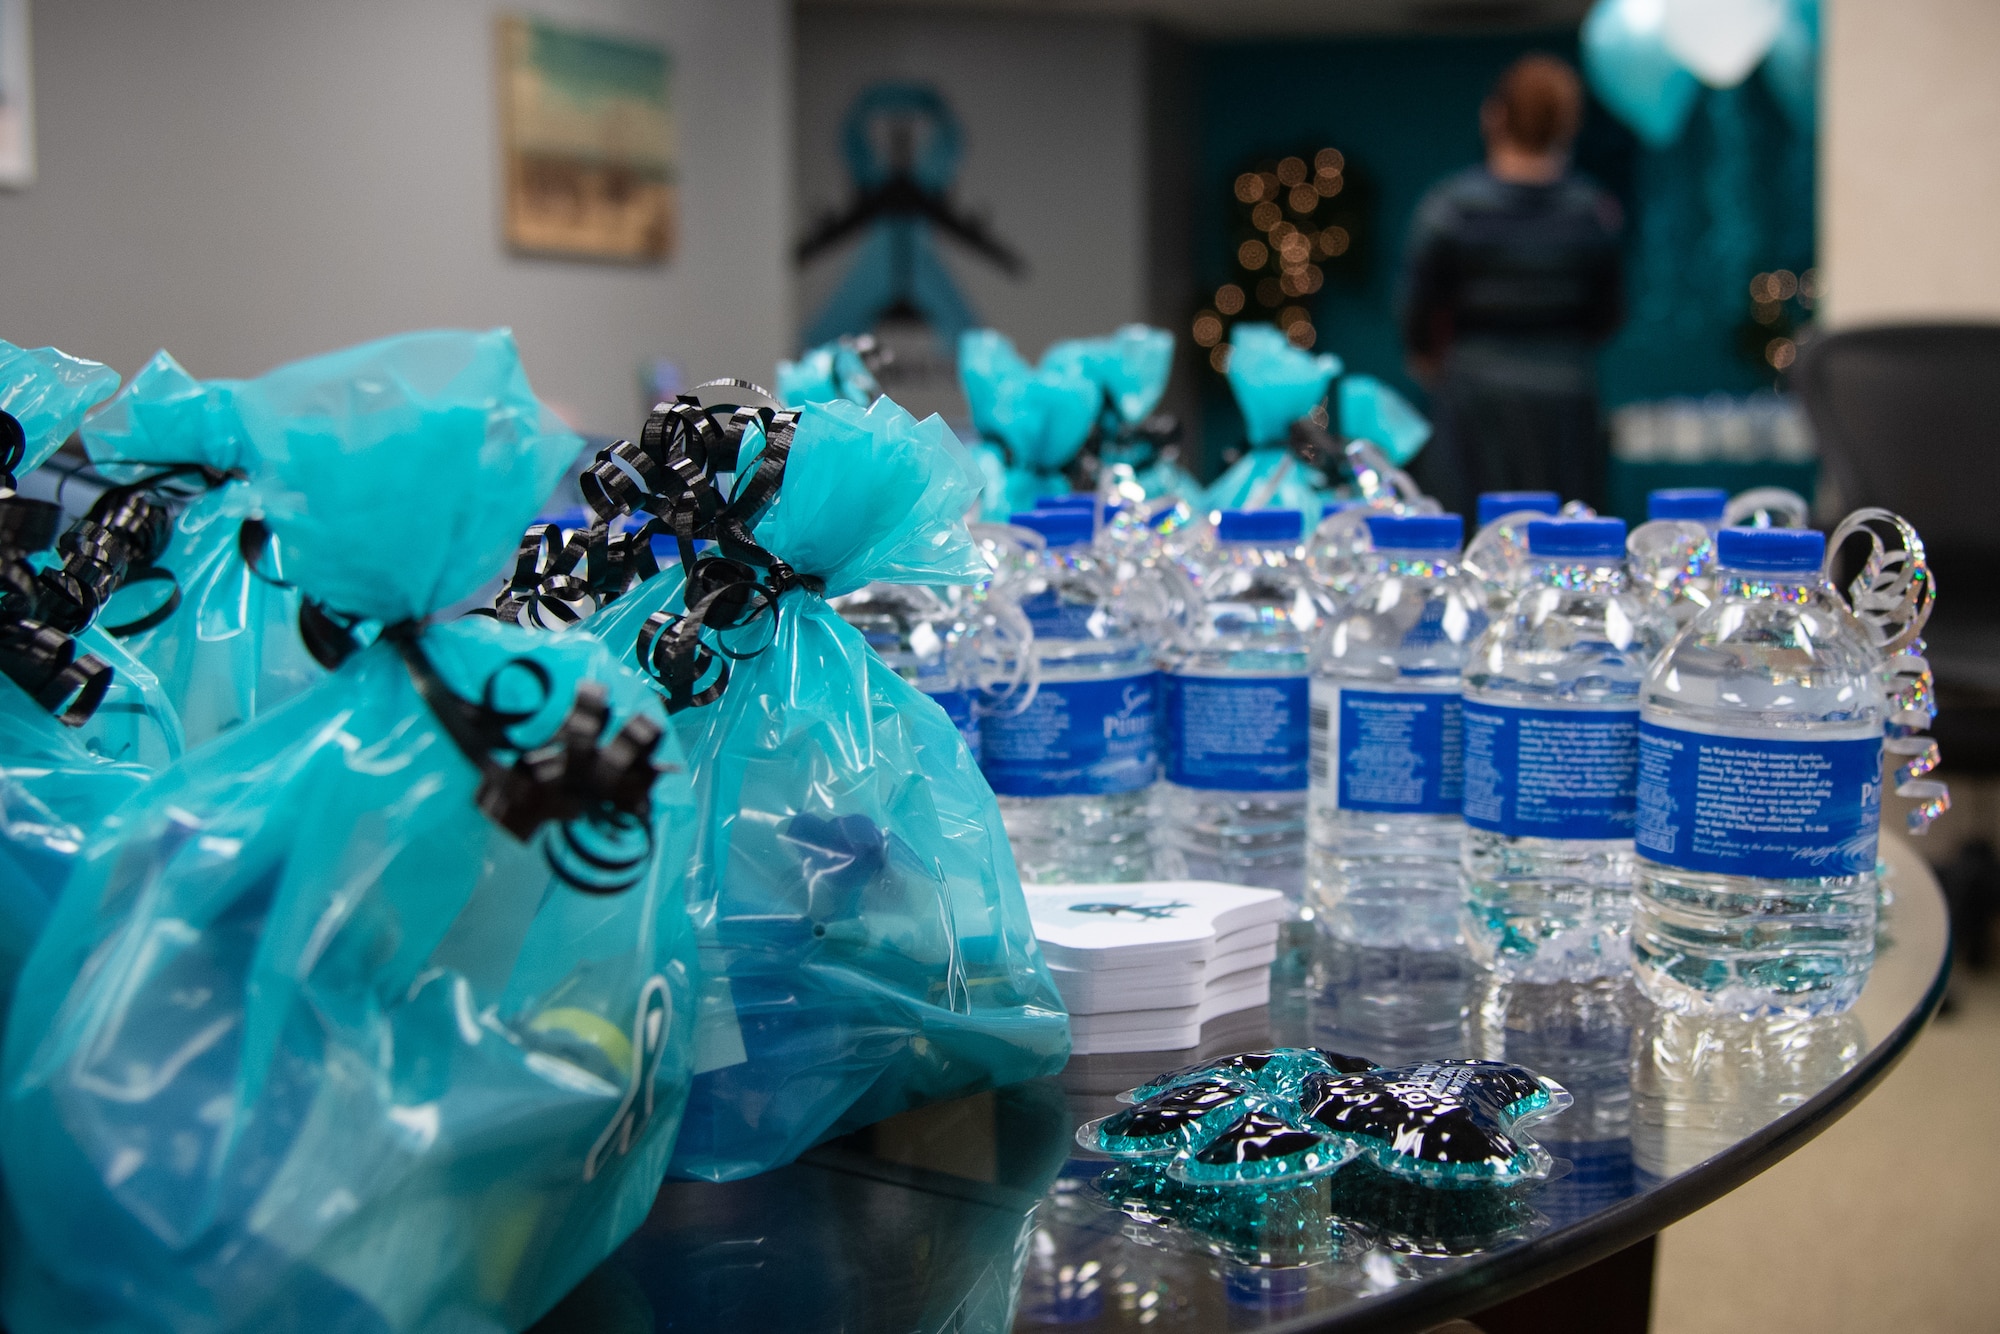 Sexual Assault Prevention and Response (SAPR) team gift bags sit on a table at Barksdale Air Force Base, La., Dec. 4, 2020.